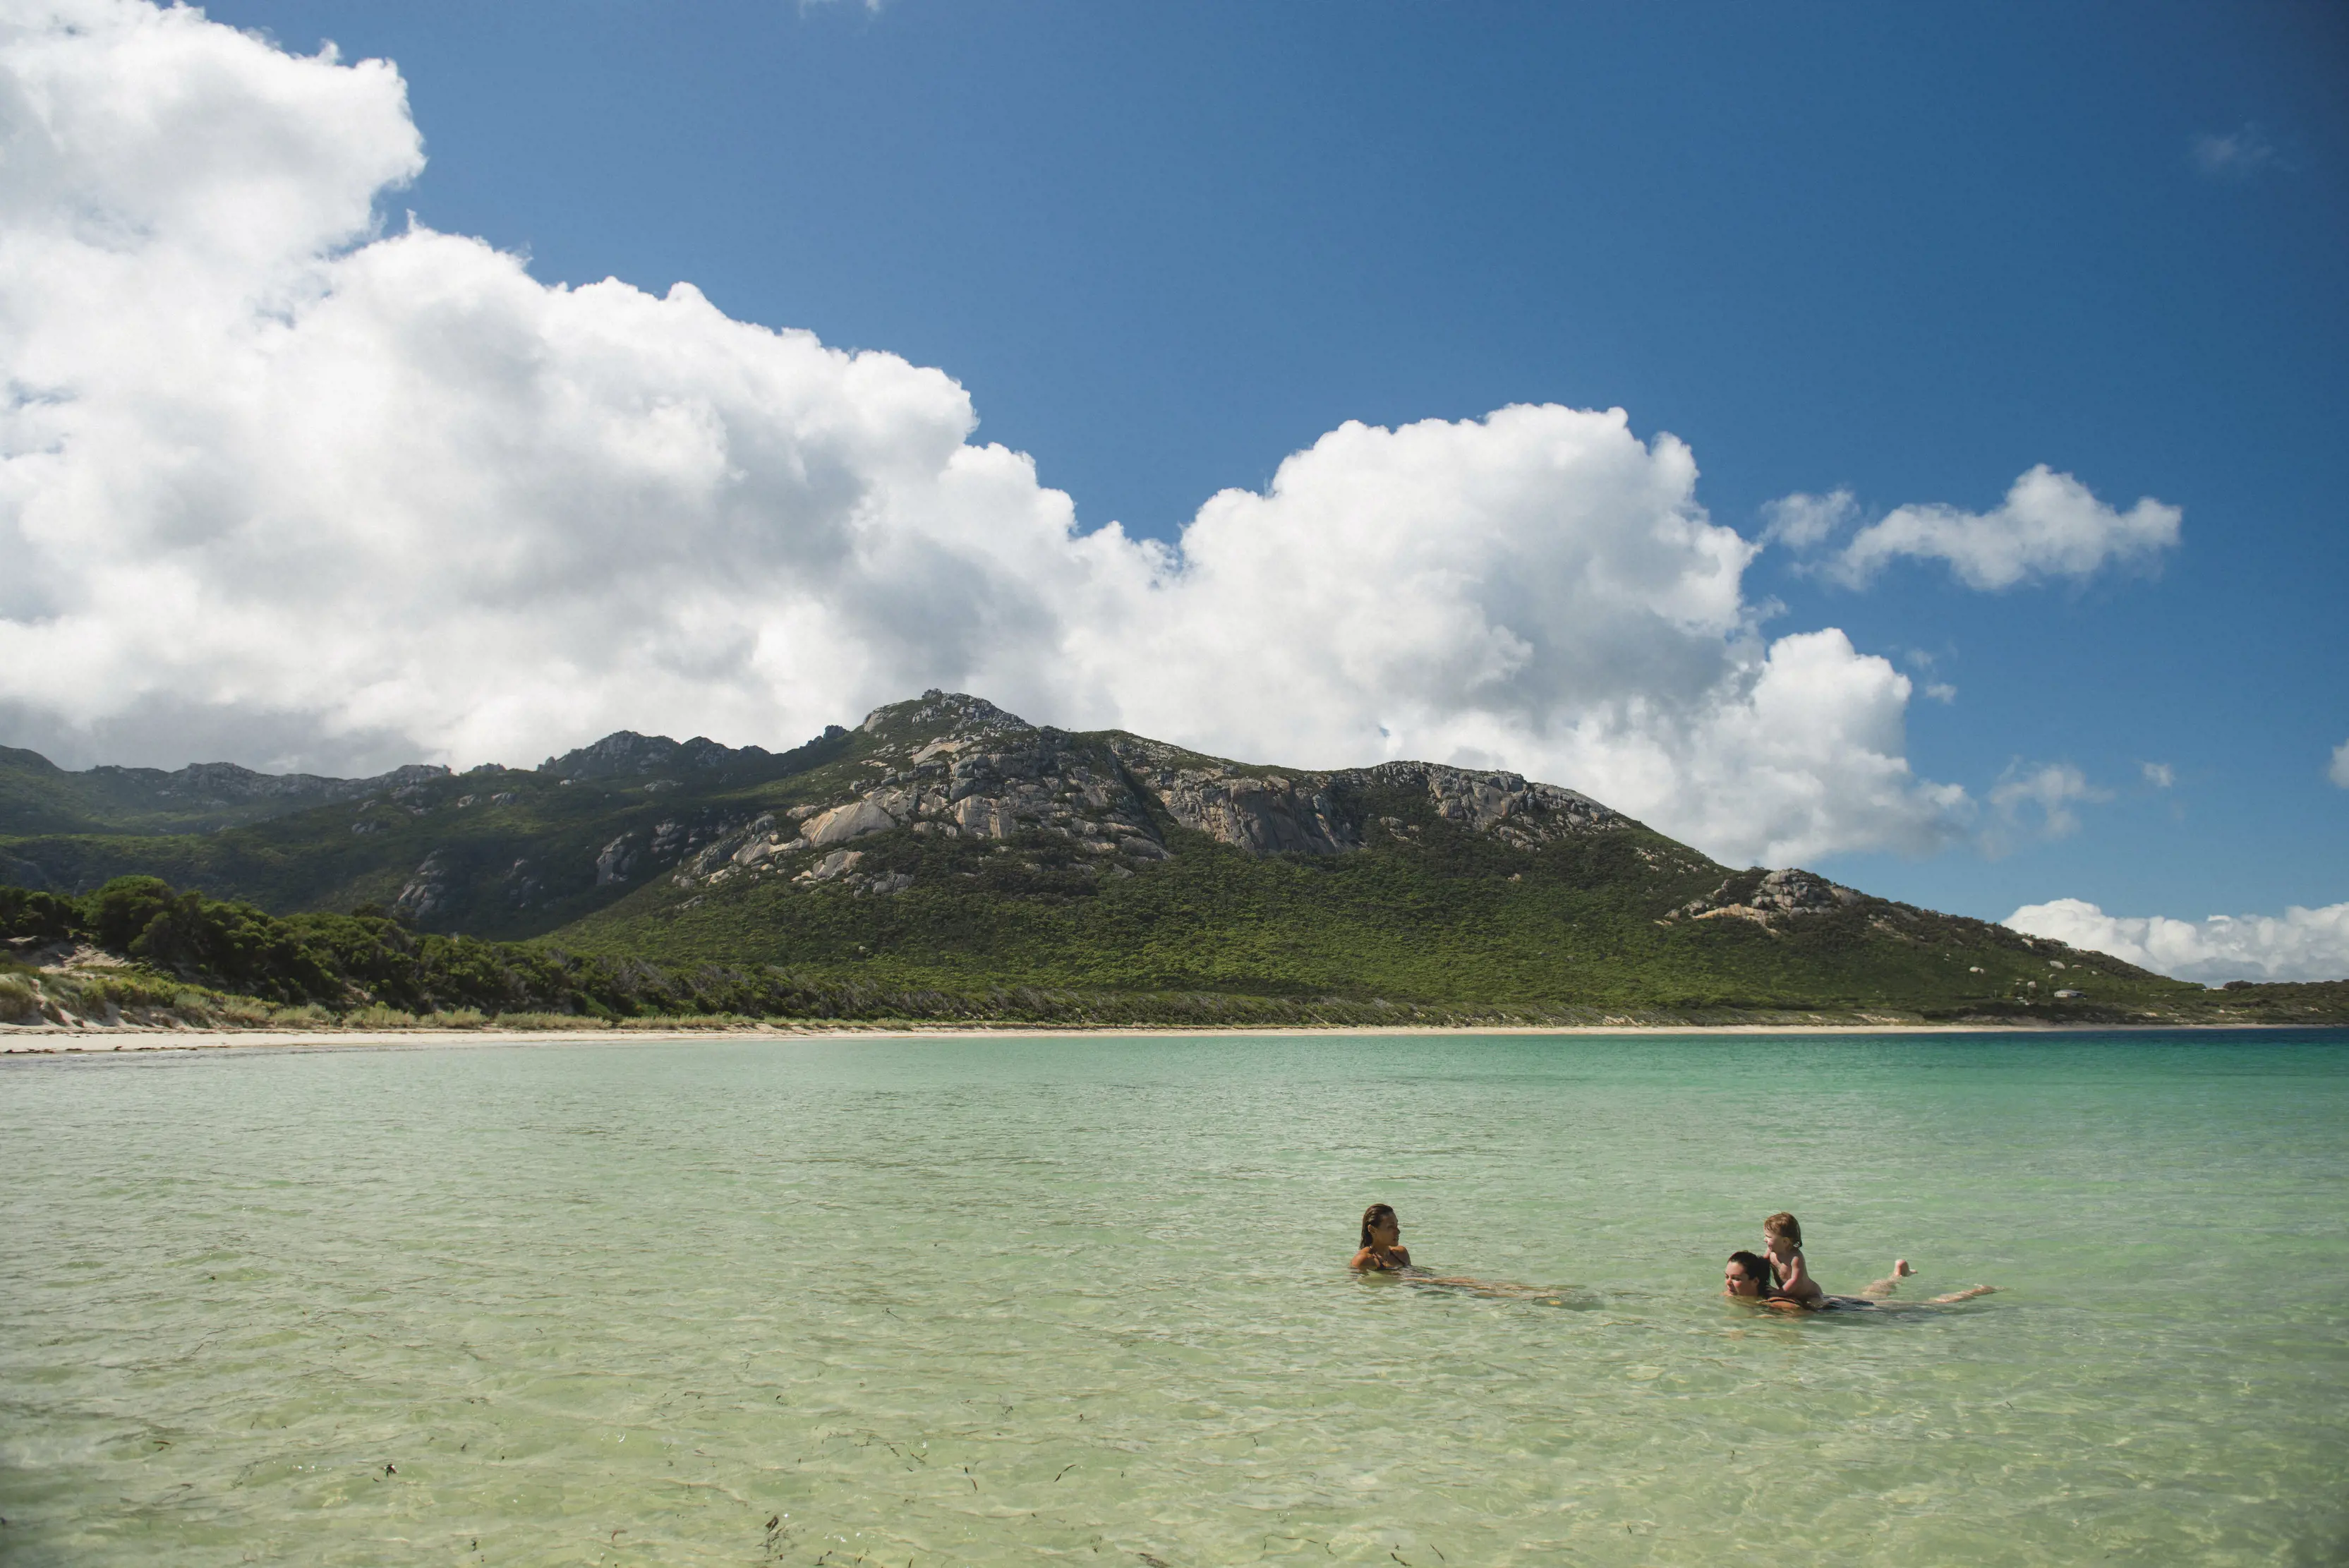 Parents and kid swimming at Trousers Point Beach, with crystal clear waters, wide expanses of white sand, and a mountain rising from the ocean.